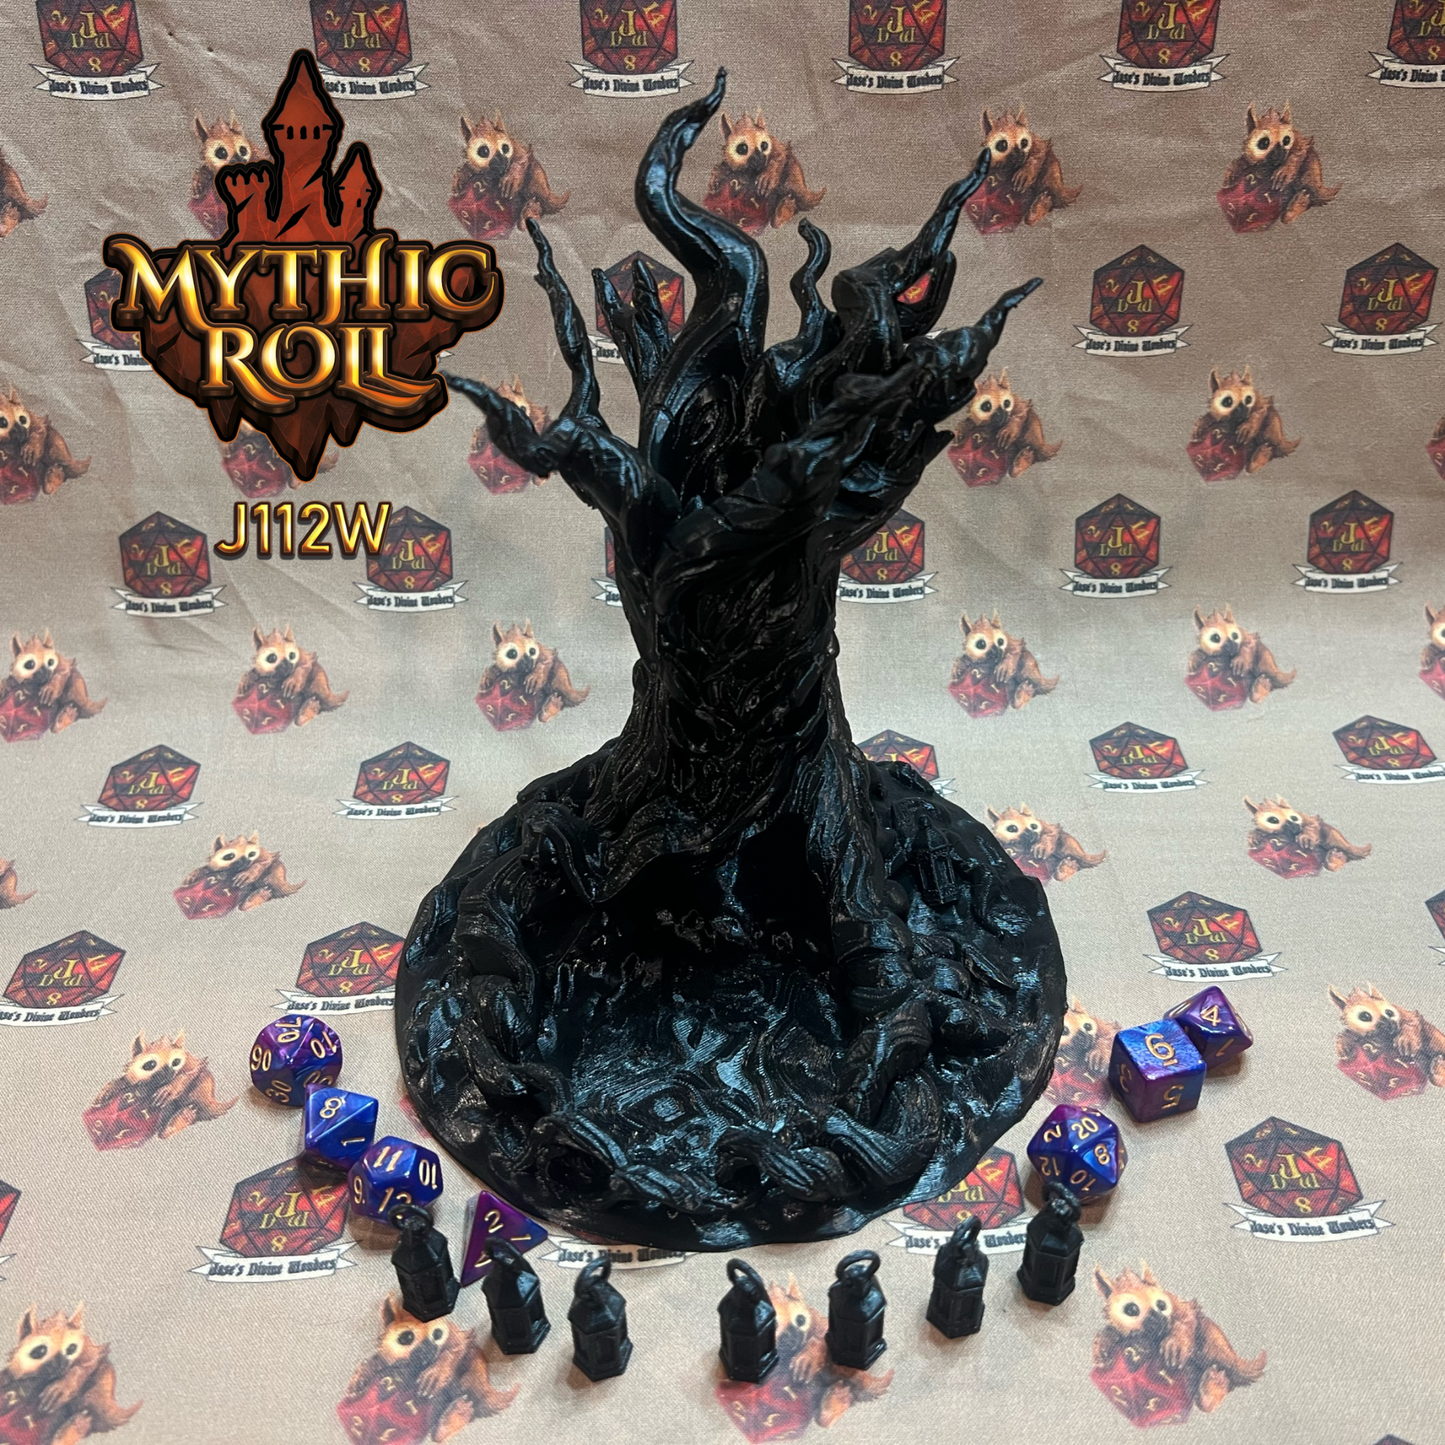 Mythic Roll Dice Tower - The Terror Tree